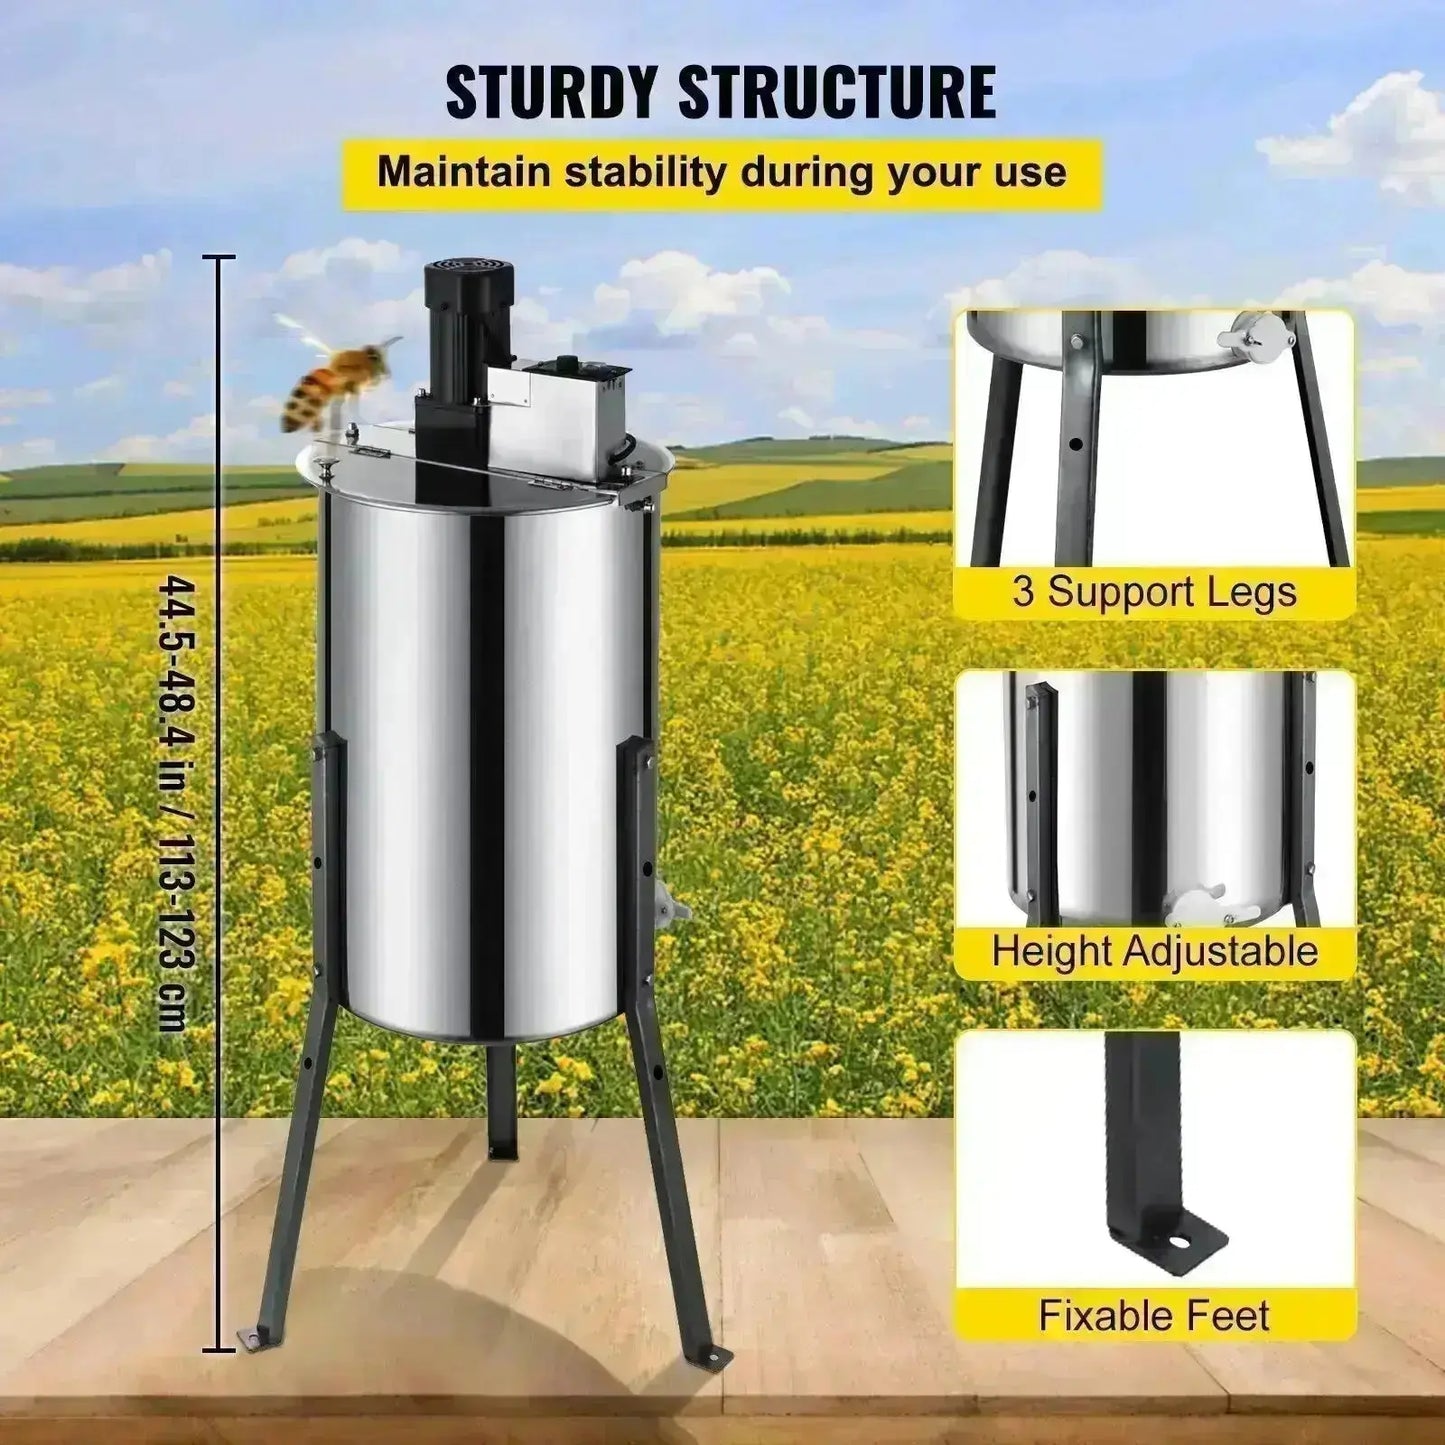 3 Frame Honey Extractor - HuxoHome